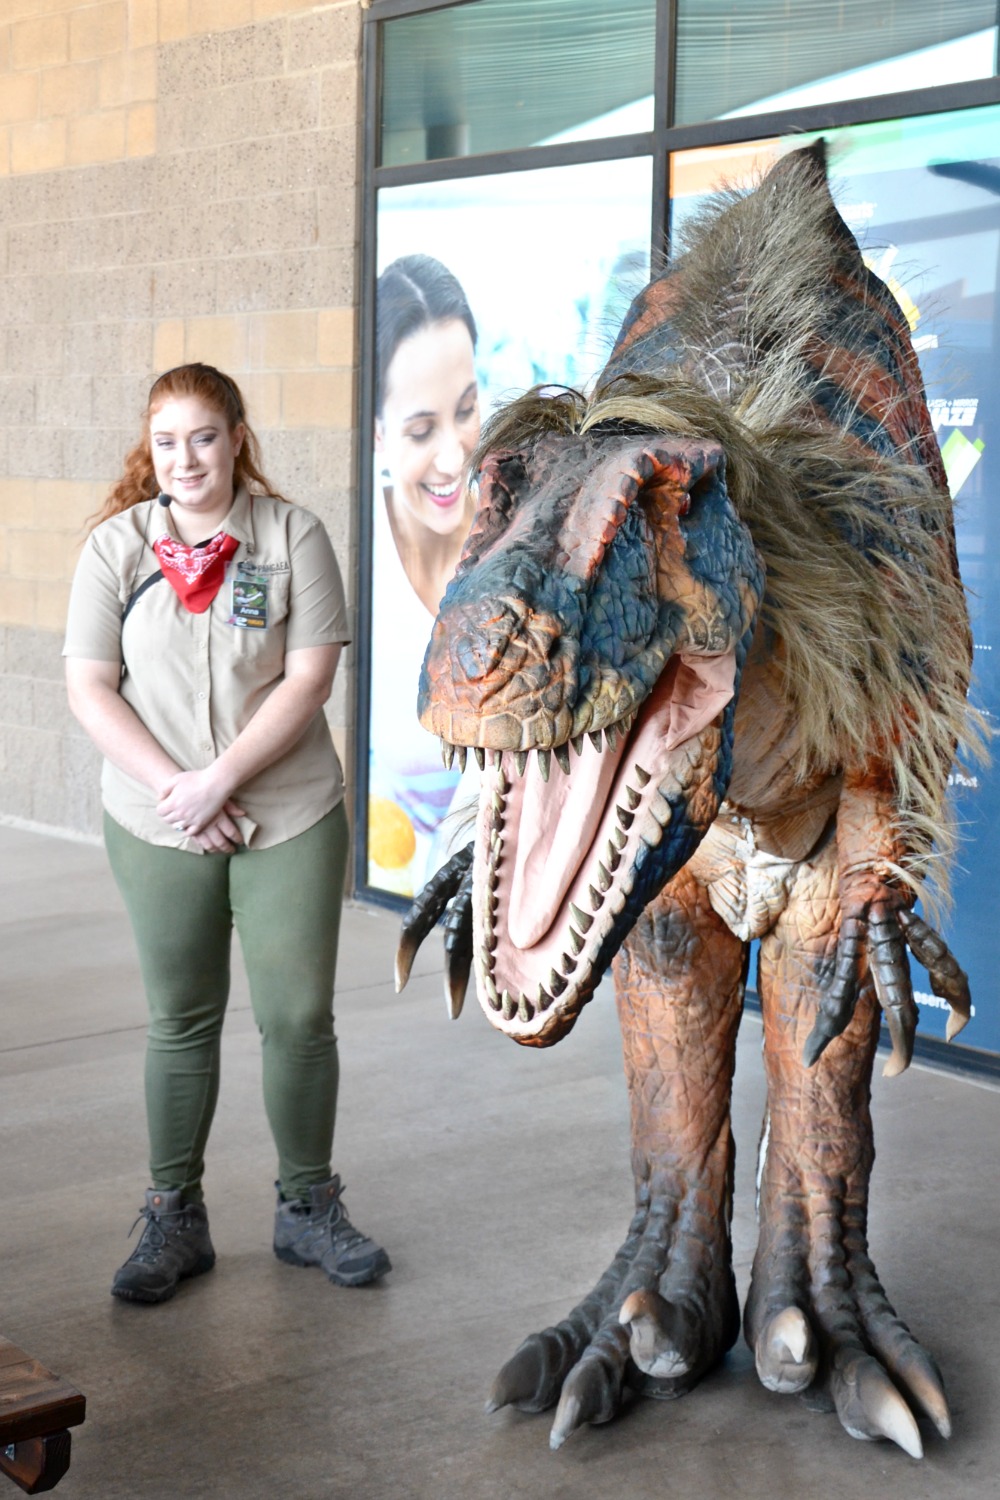 Host the ultimate dinosaur party at Pangaea Land of the Dinosaurs in Scottsdale, Arizona including a special visit from a dinosaur during lunch.